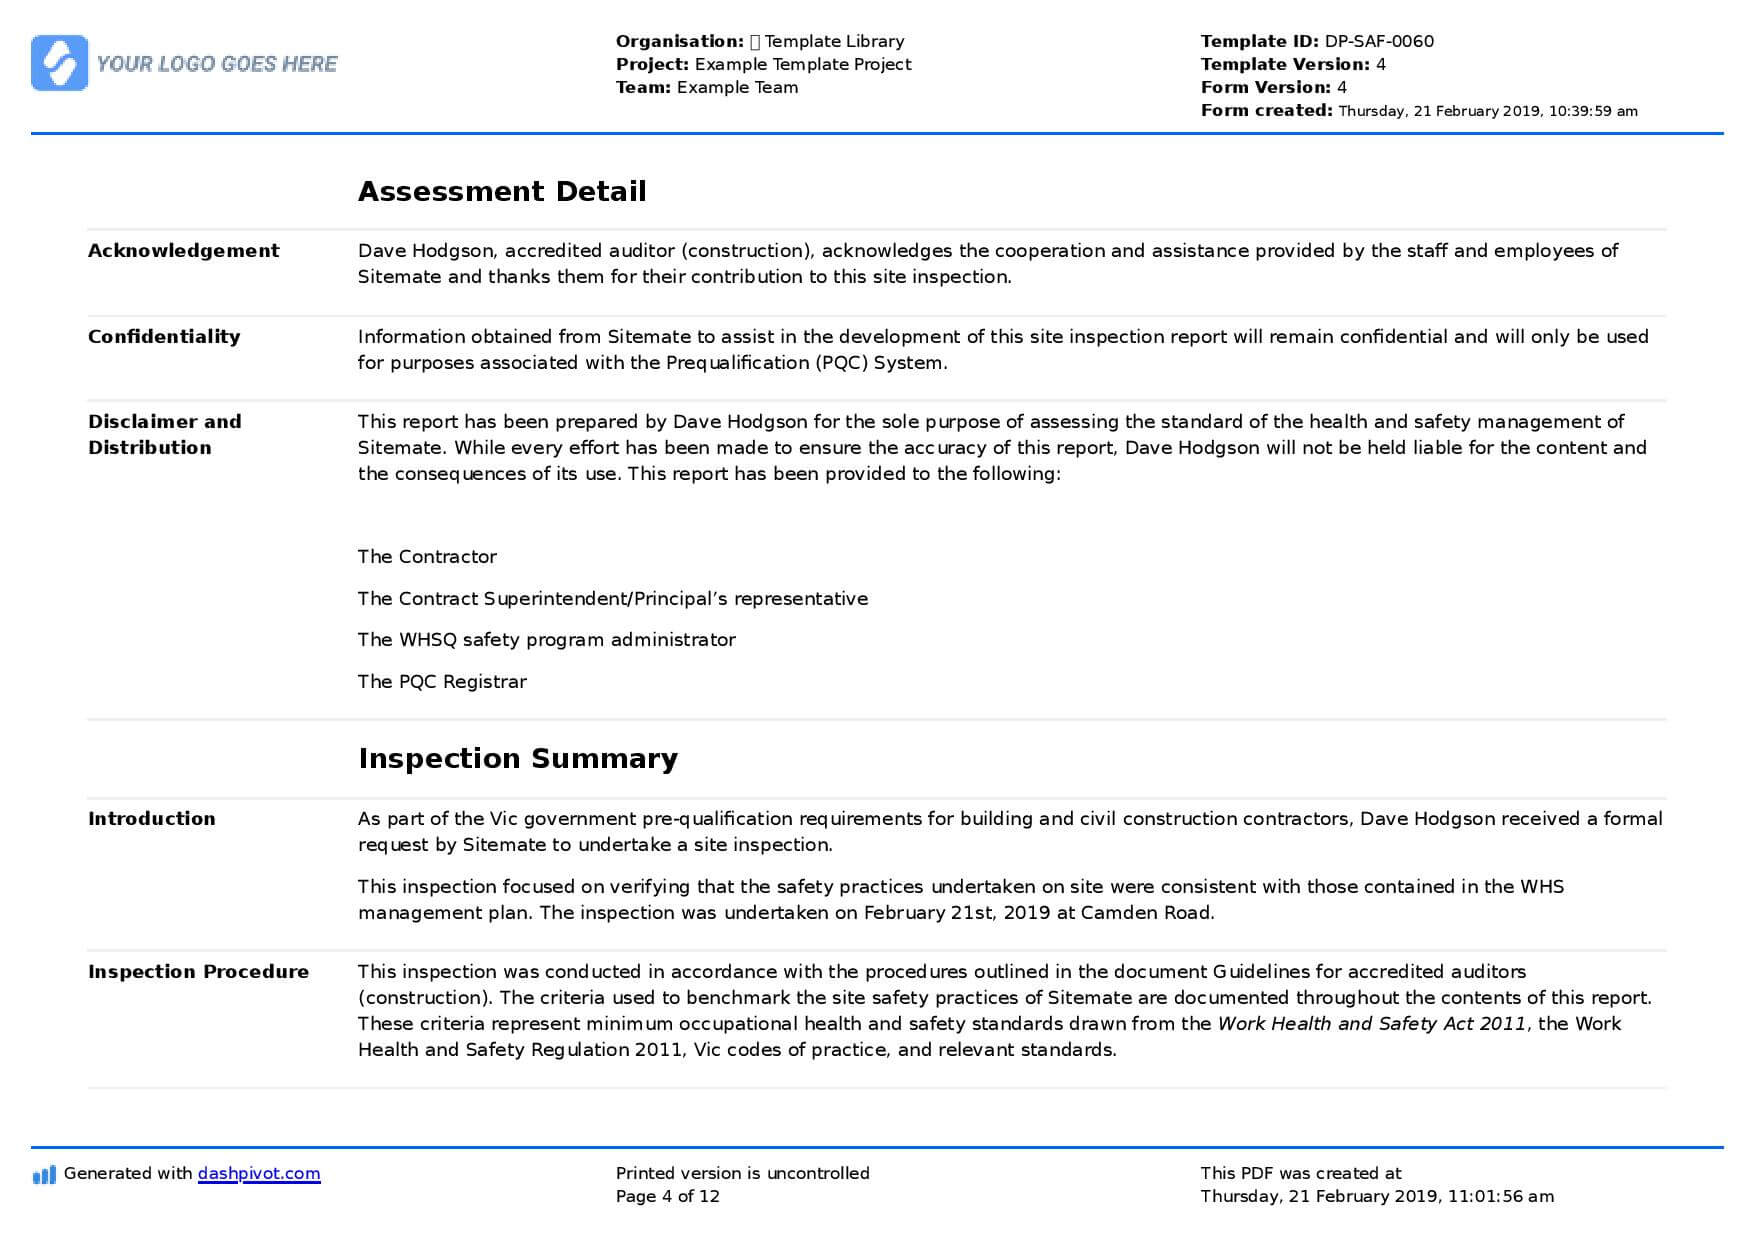 Site Inspection Report: Free Template, Sample And A Proven Inside Template For Information Report